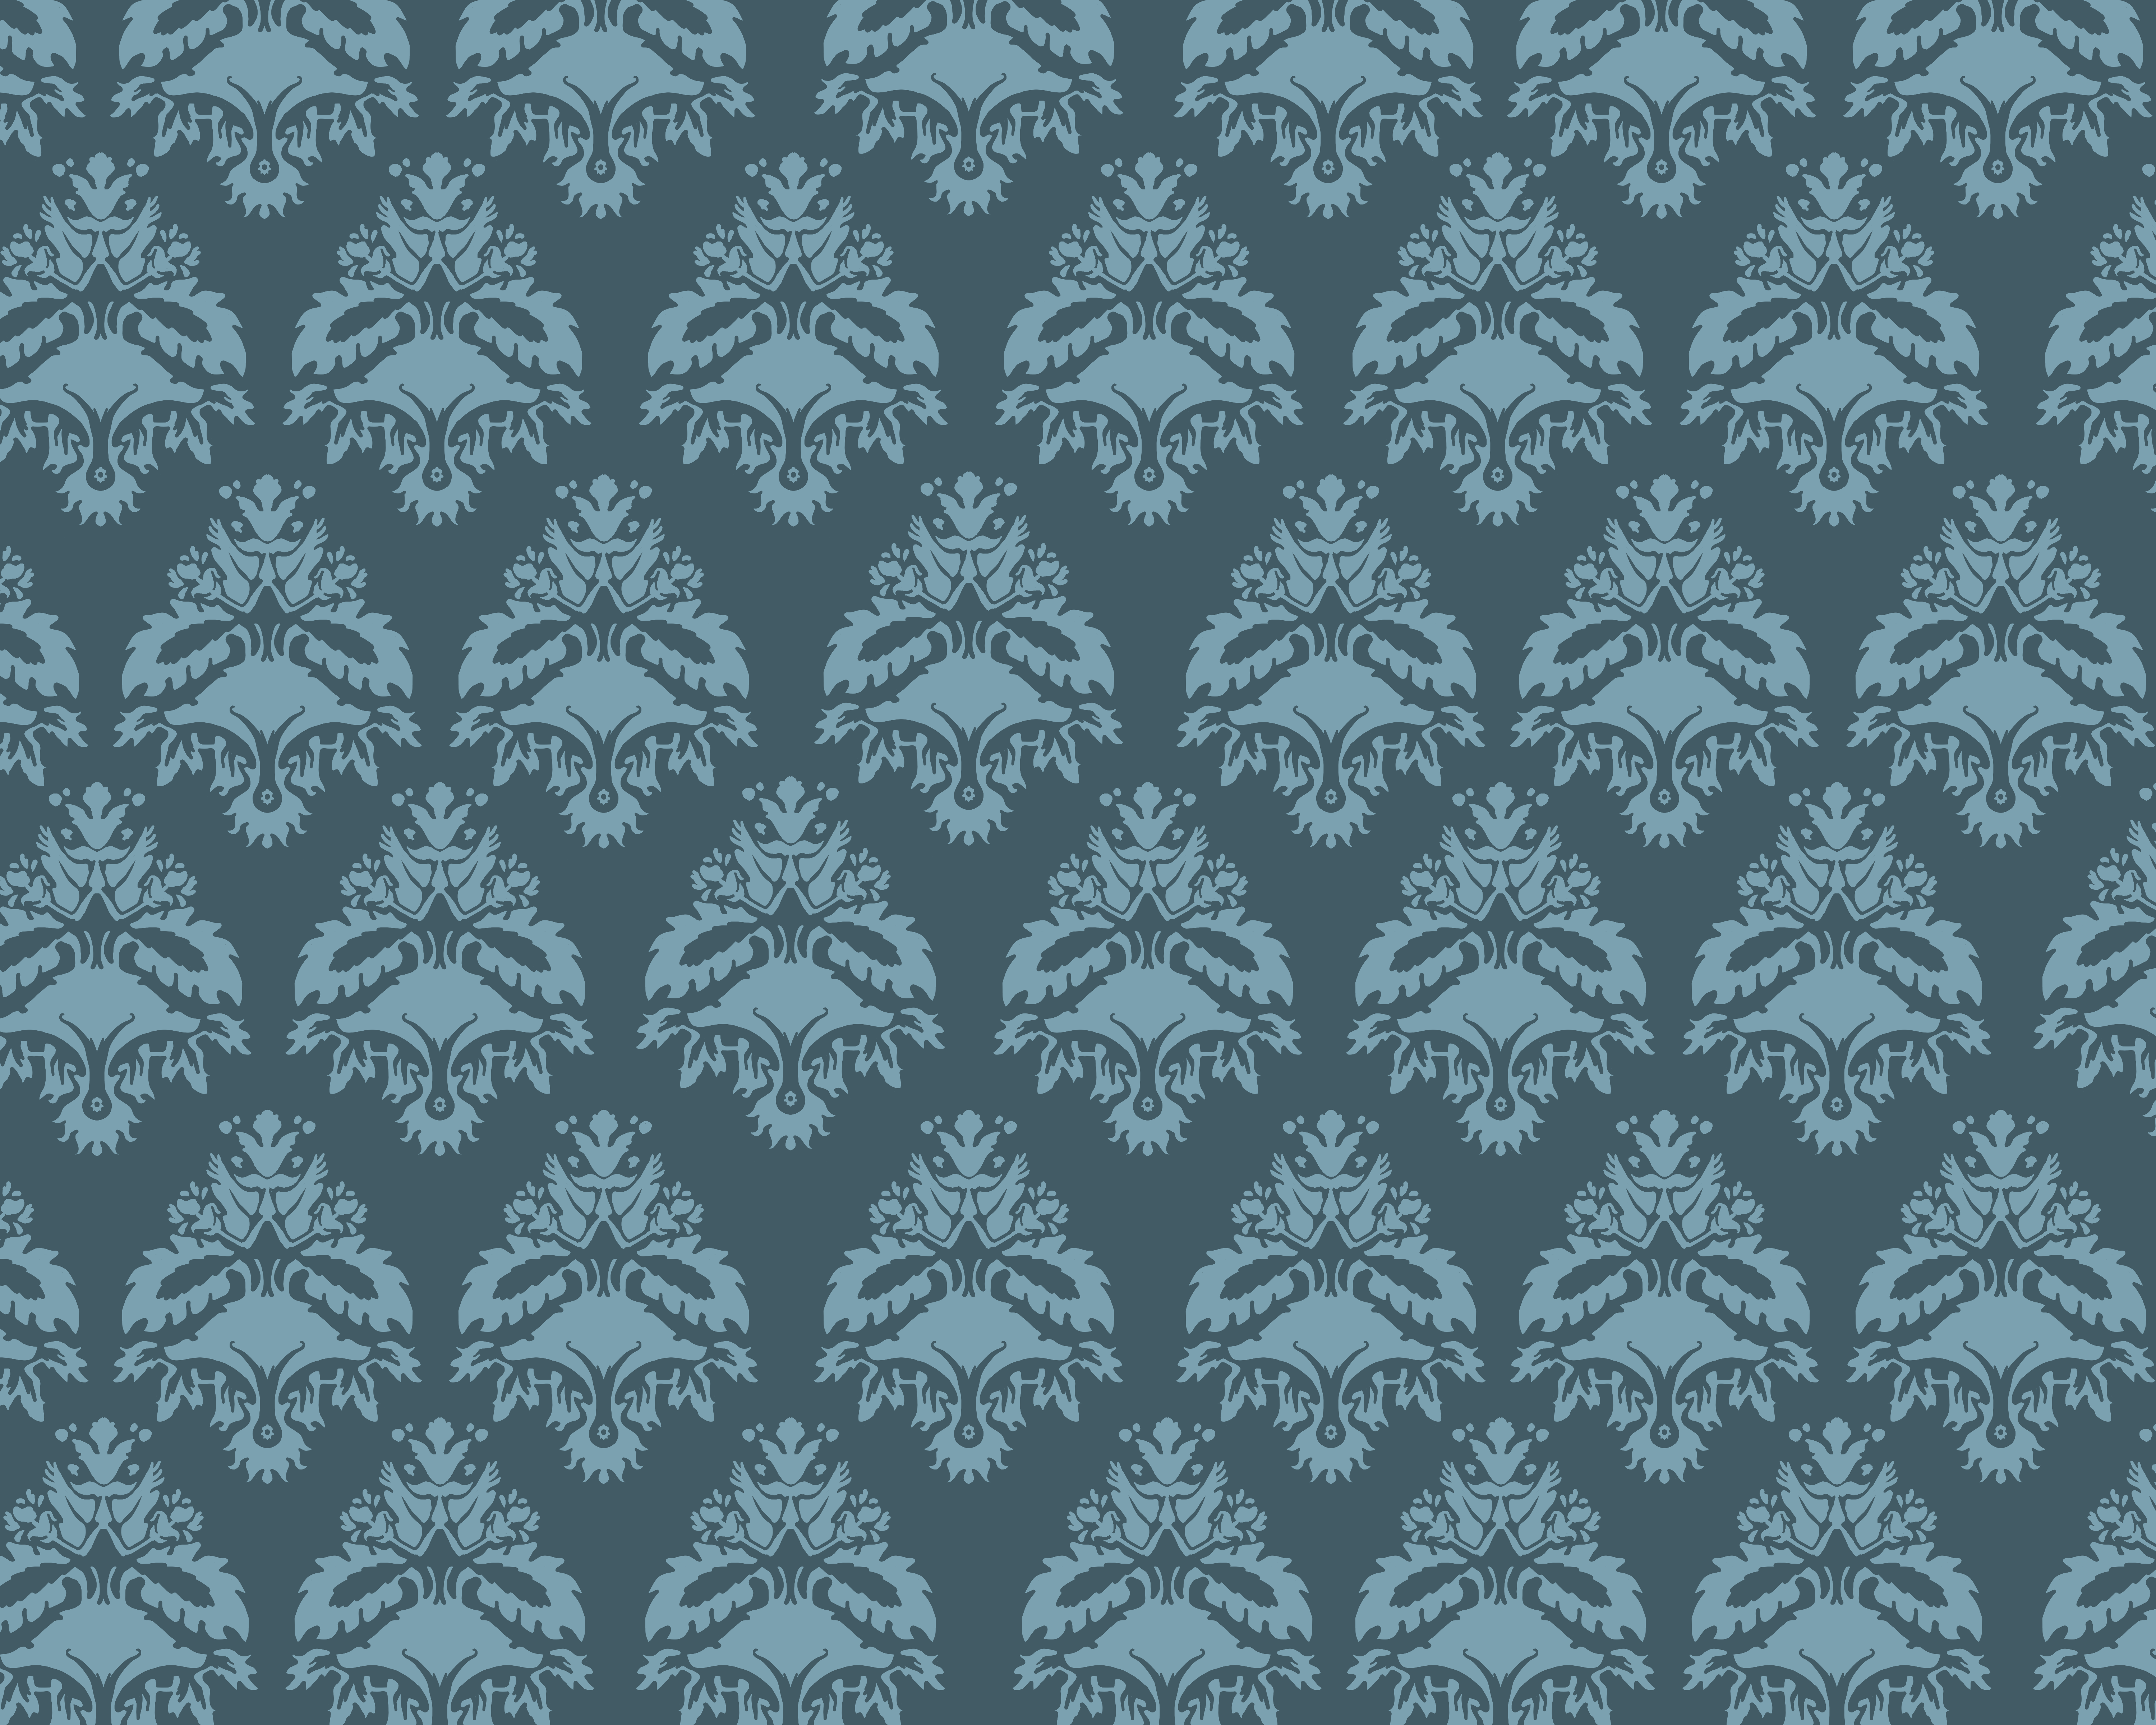 Sound of Music Spot Endpapers